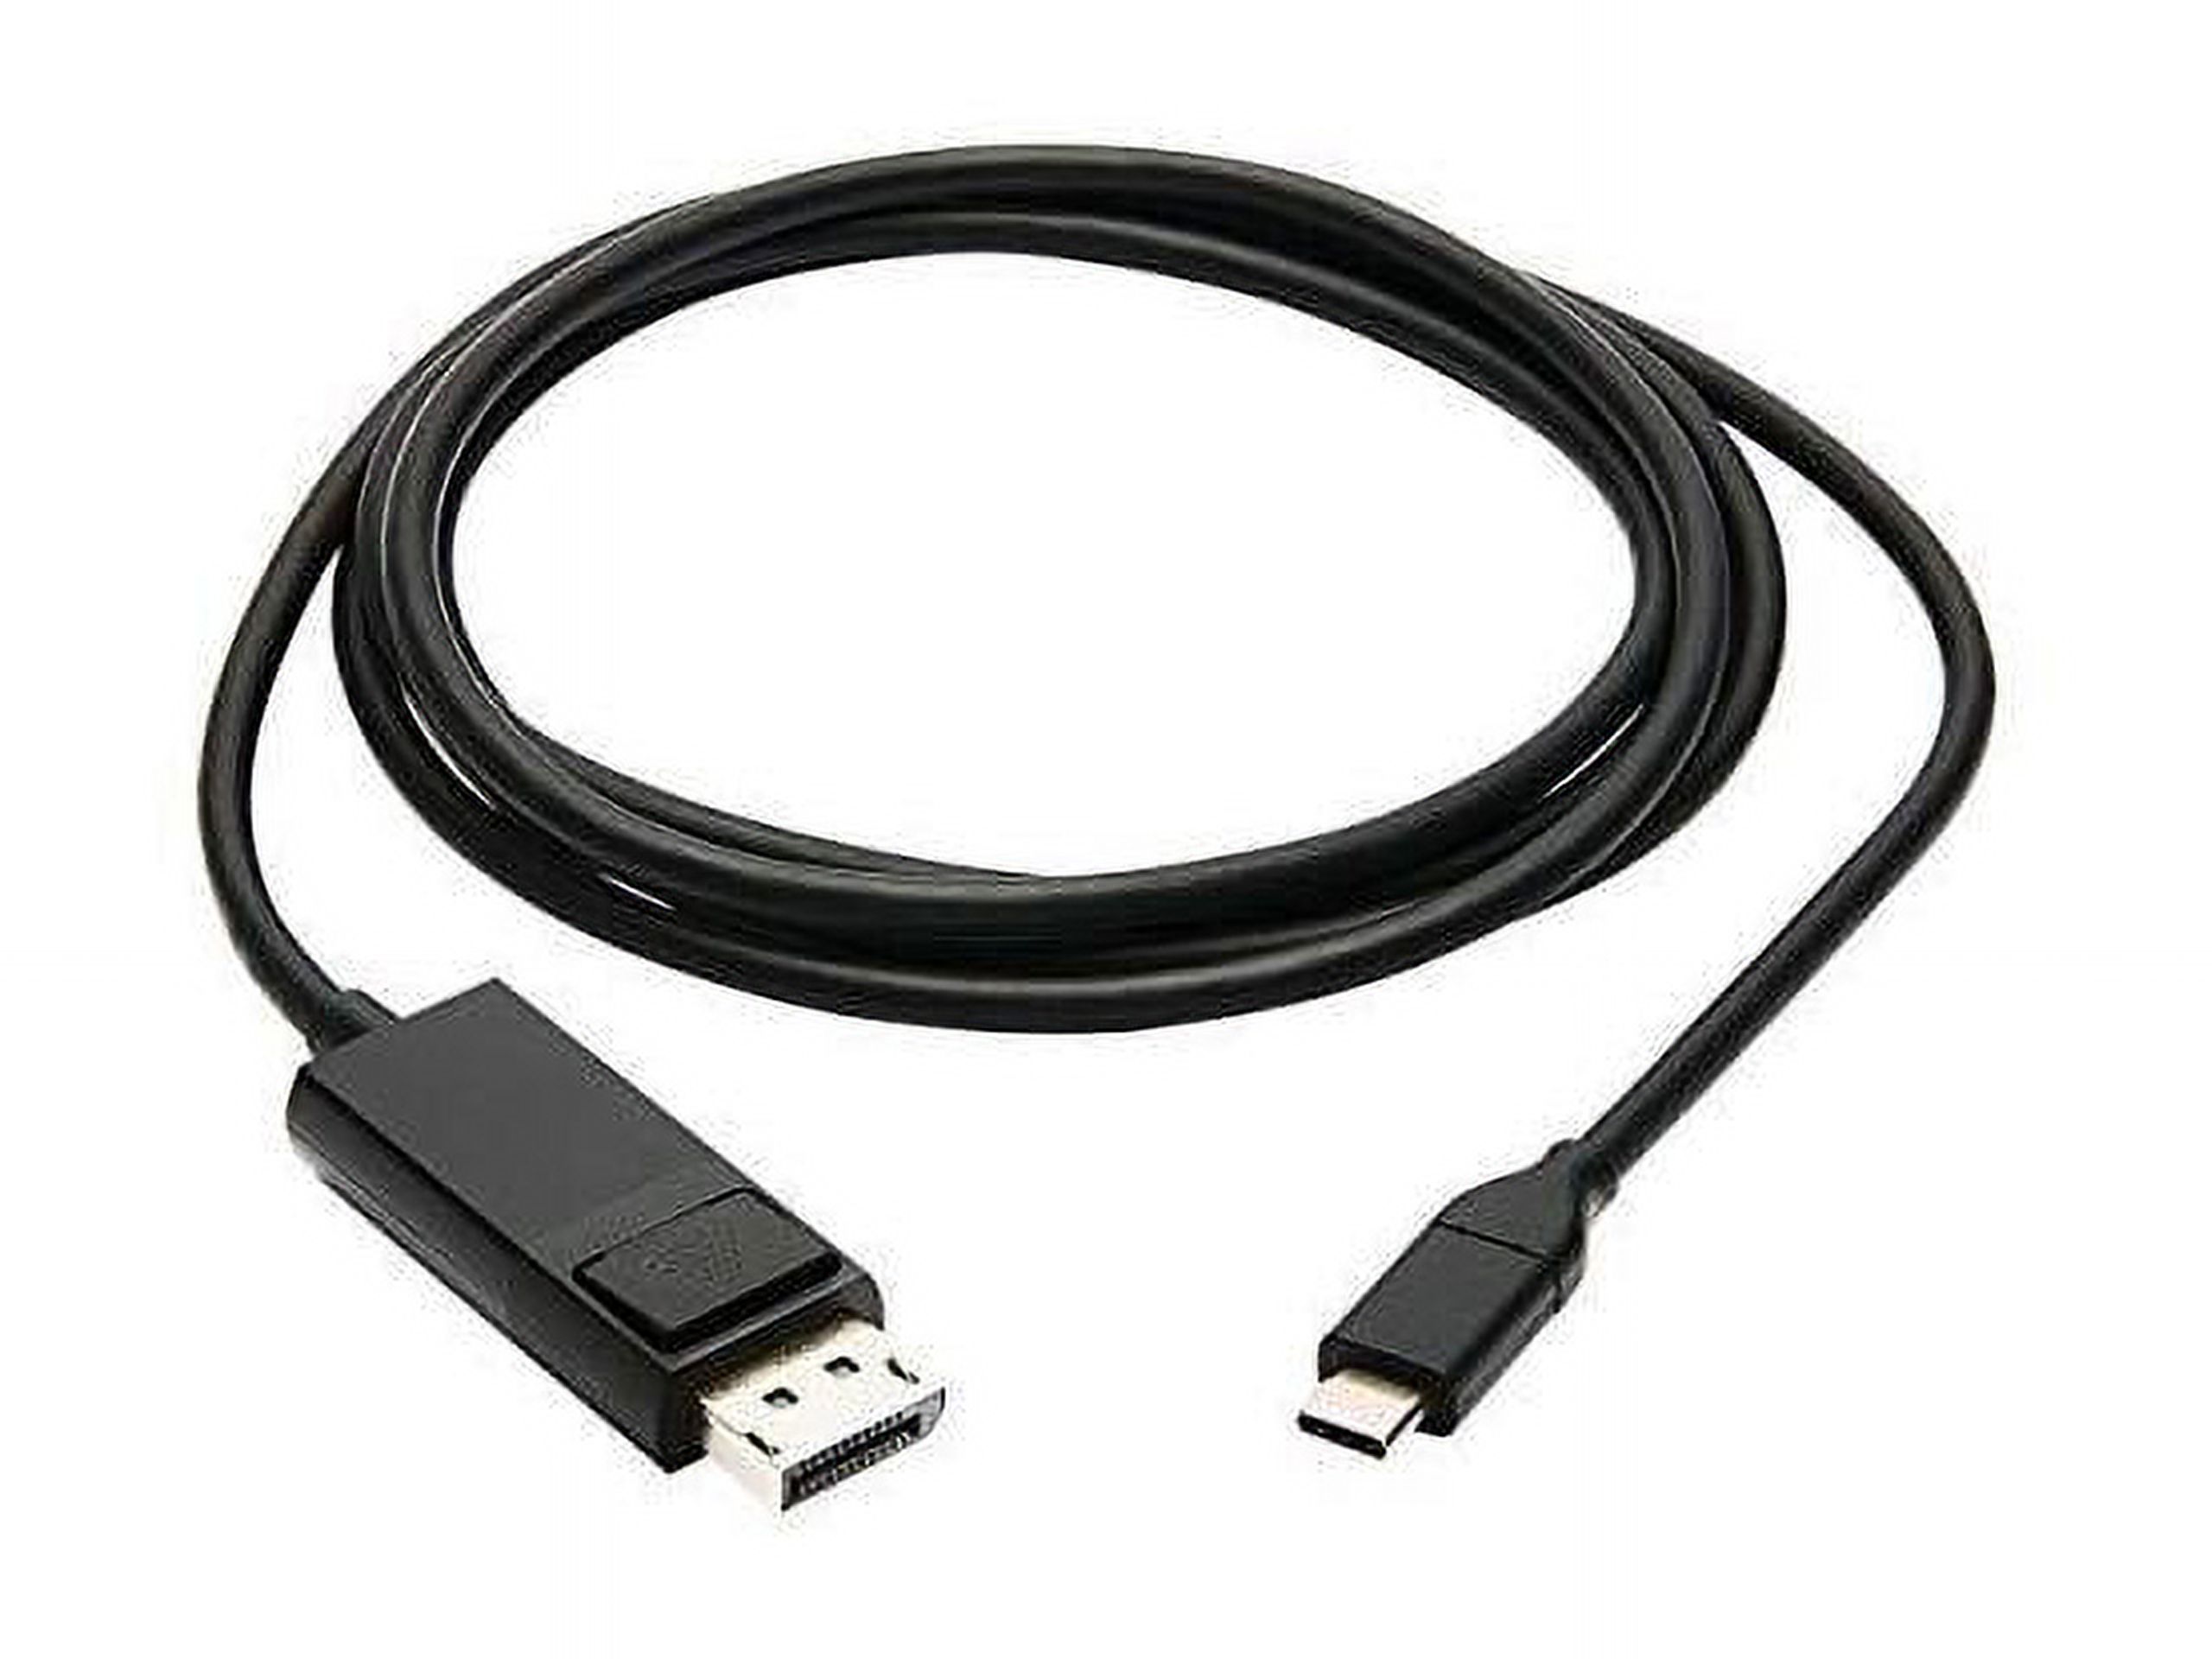 Tripp Lite U444-006-DP-BE 6 ft. USB-C to Display Port Male to Male Adapter, Black - image 4 of 4